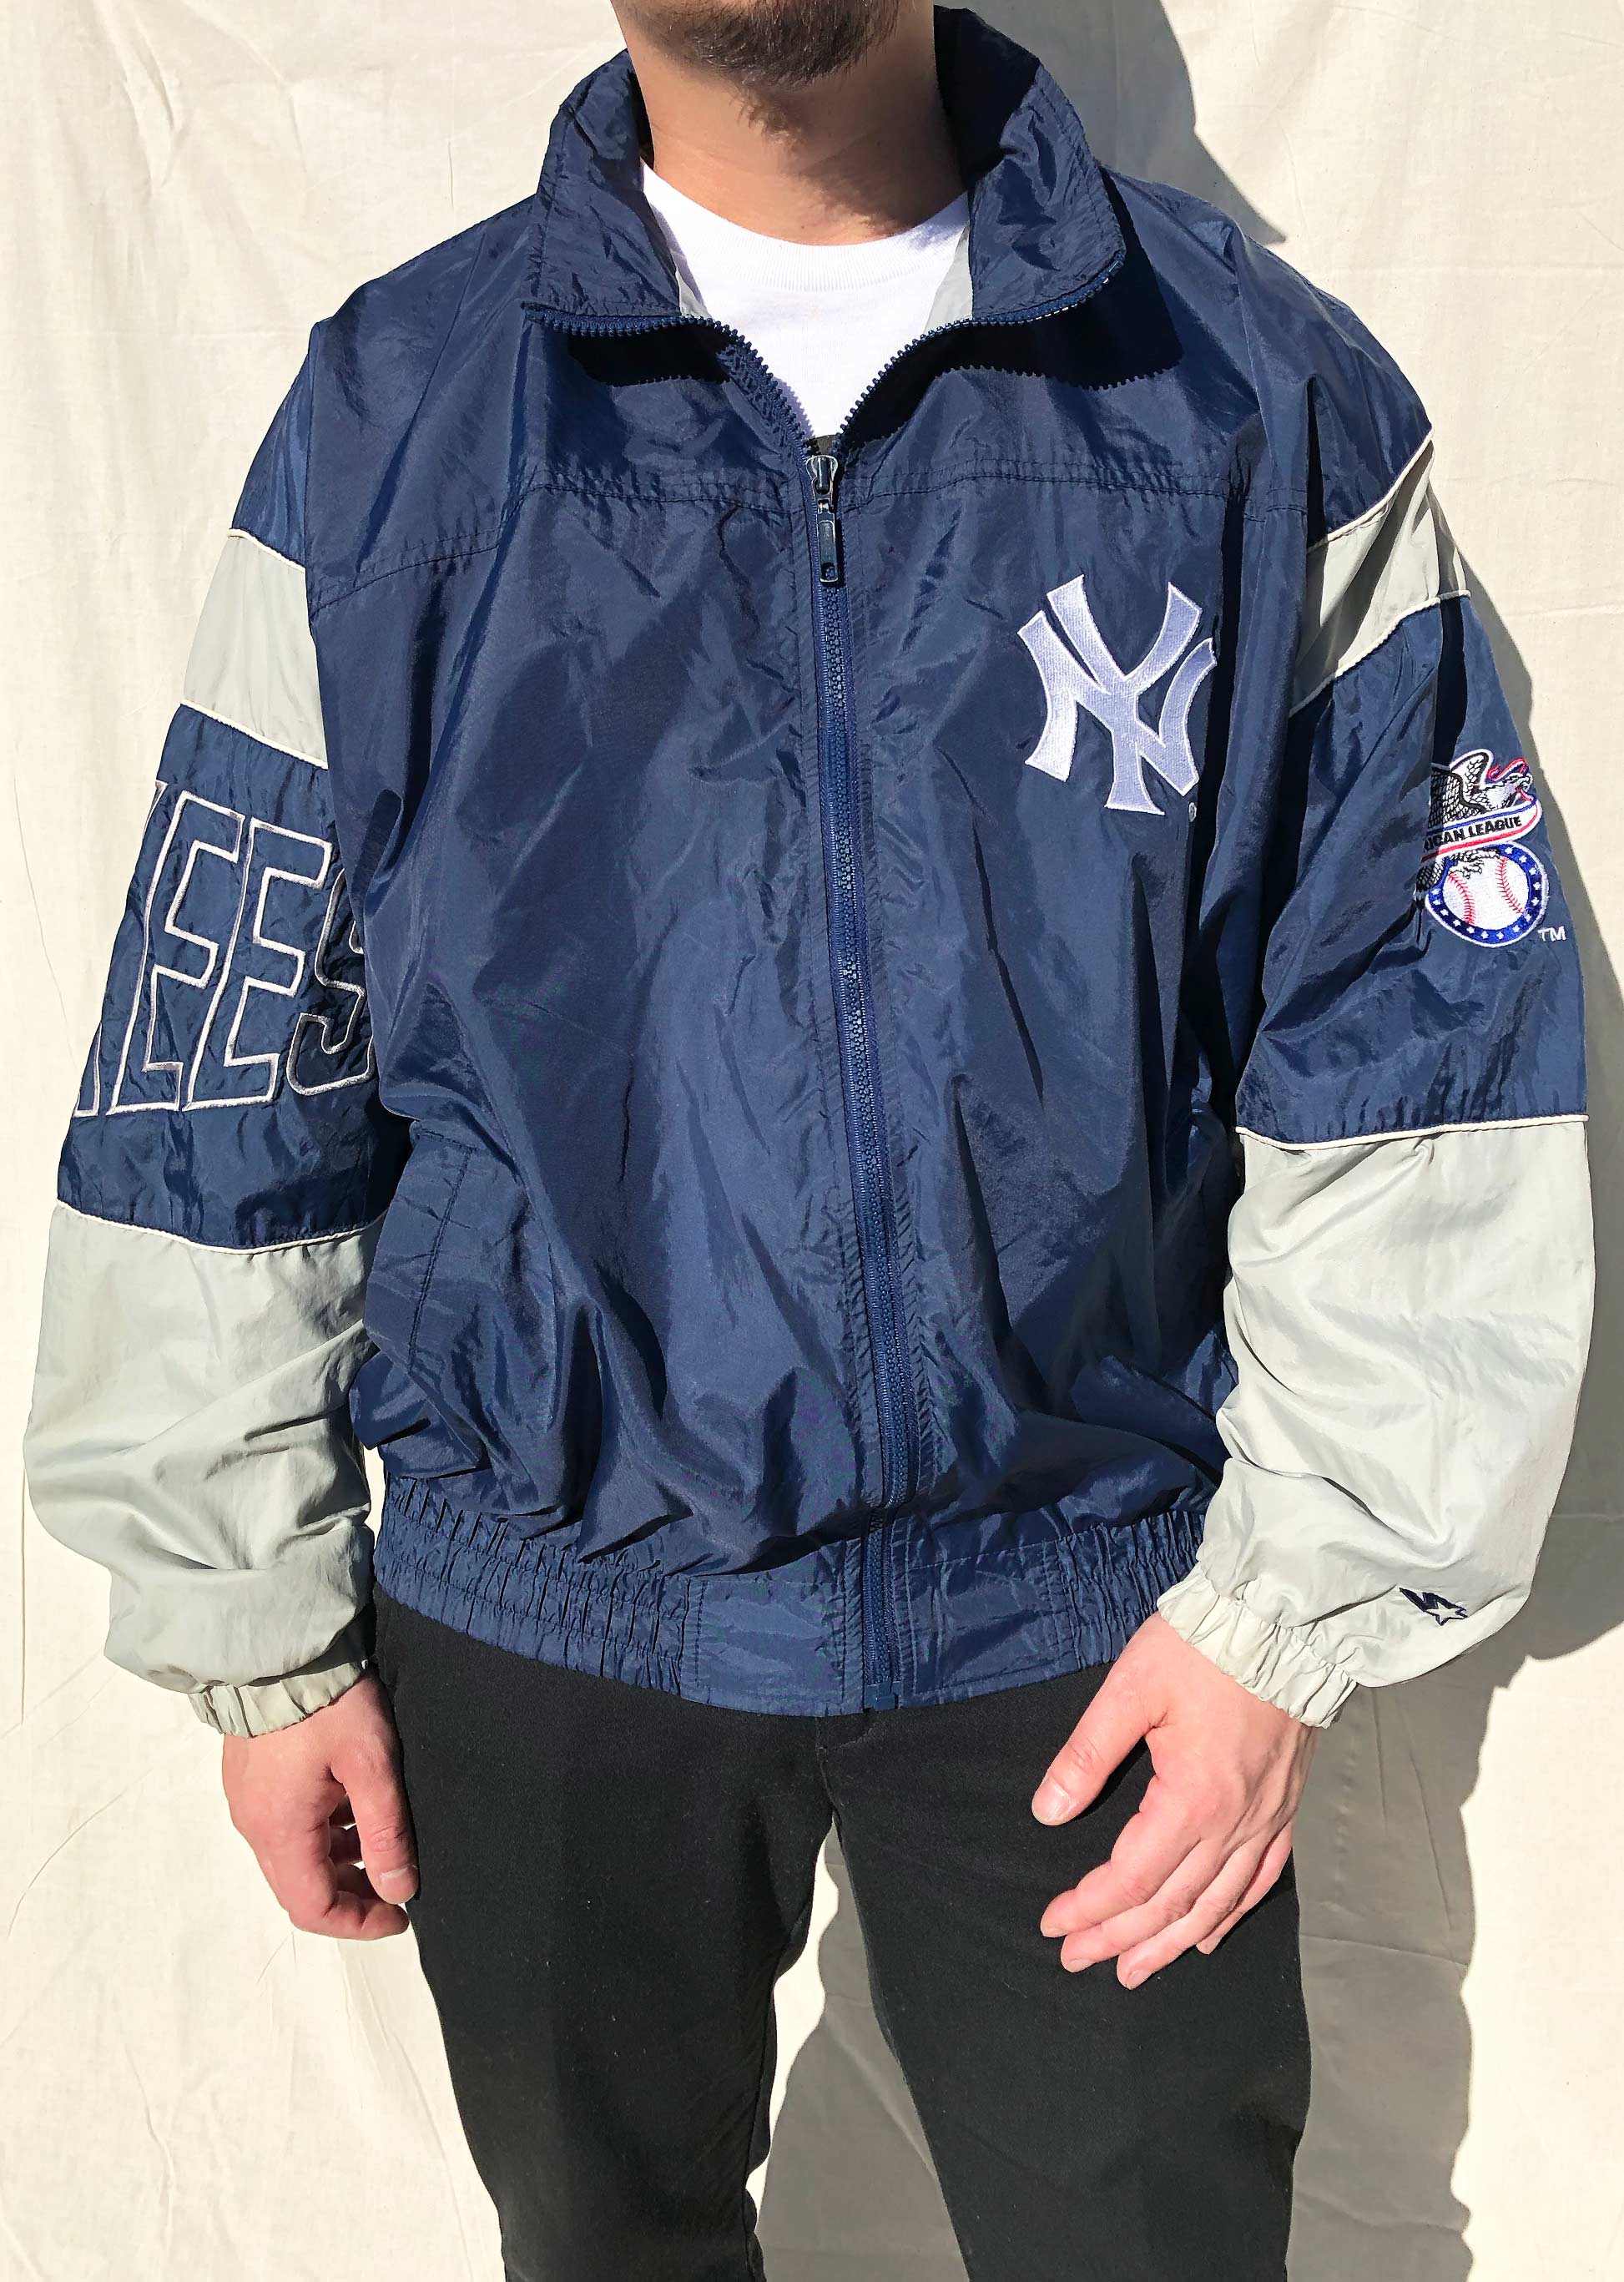 MLB Majestic New York Yankees Jacket Navy (L) – Chop Suey Official